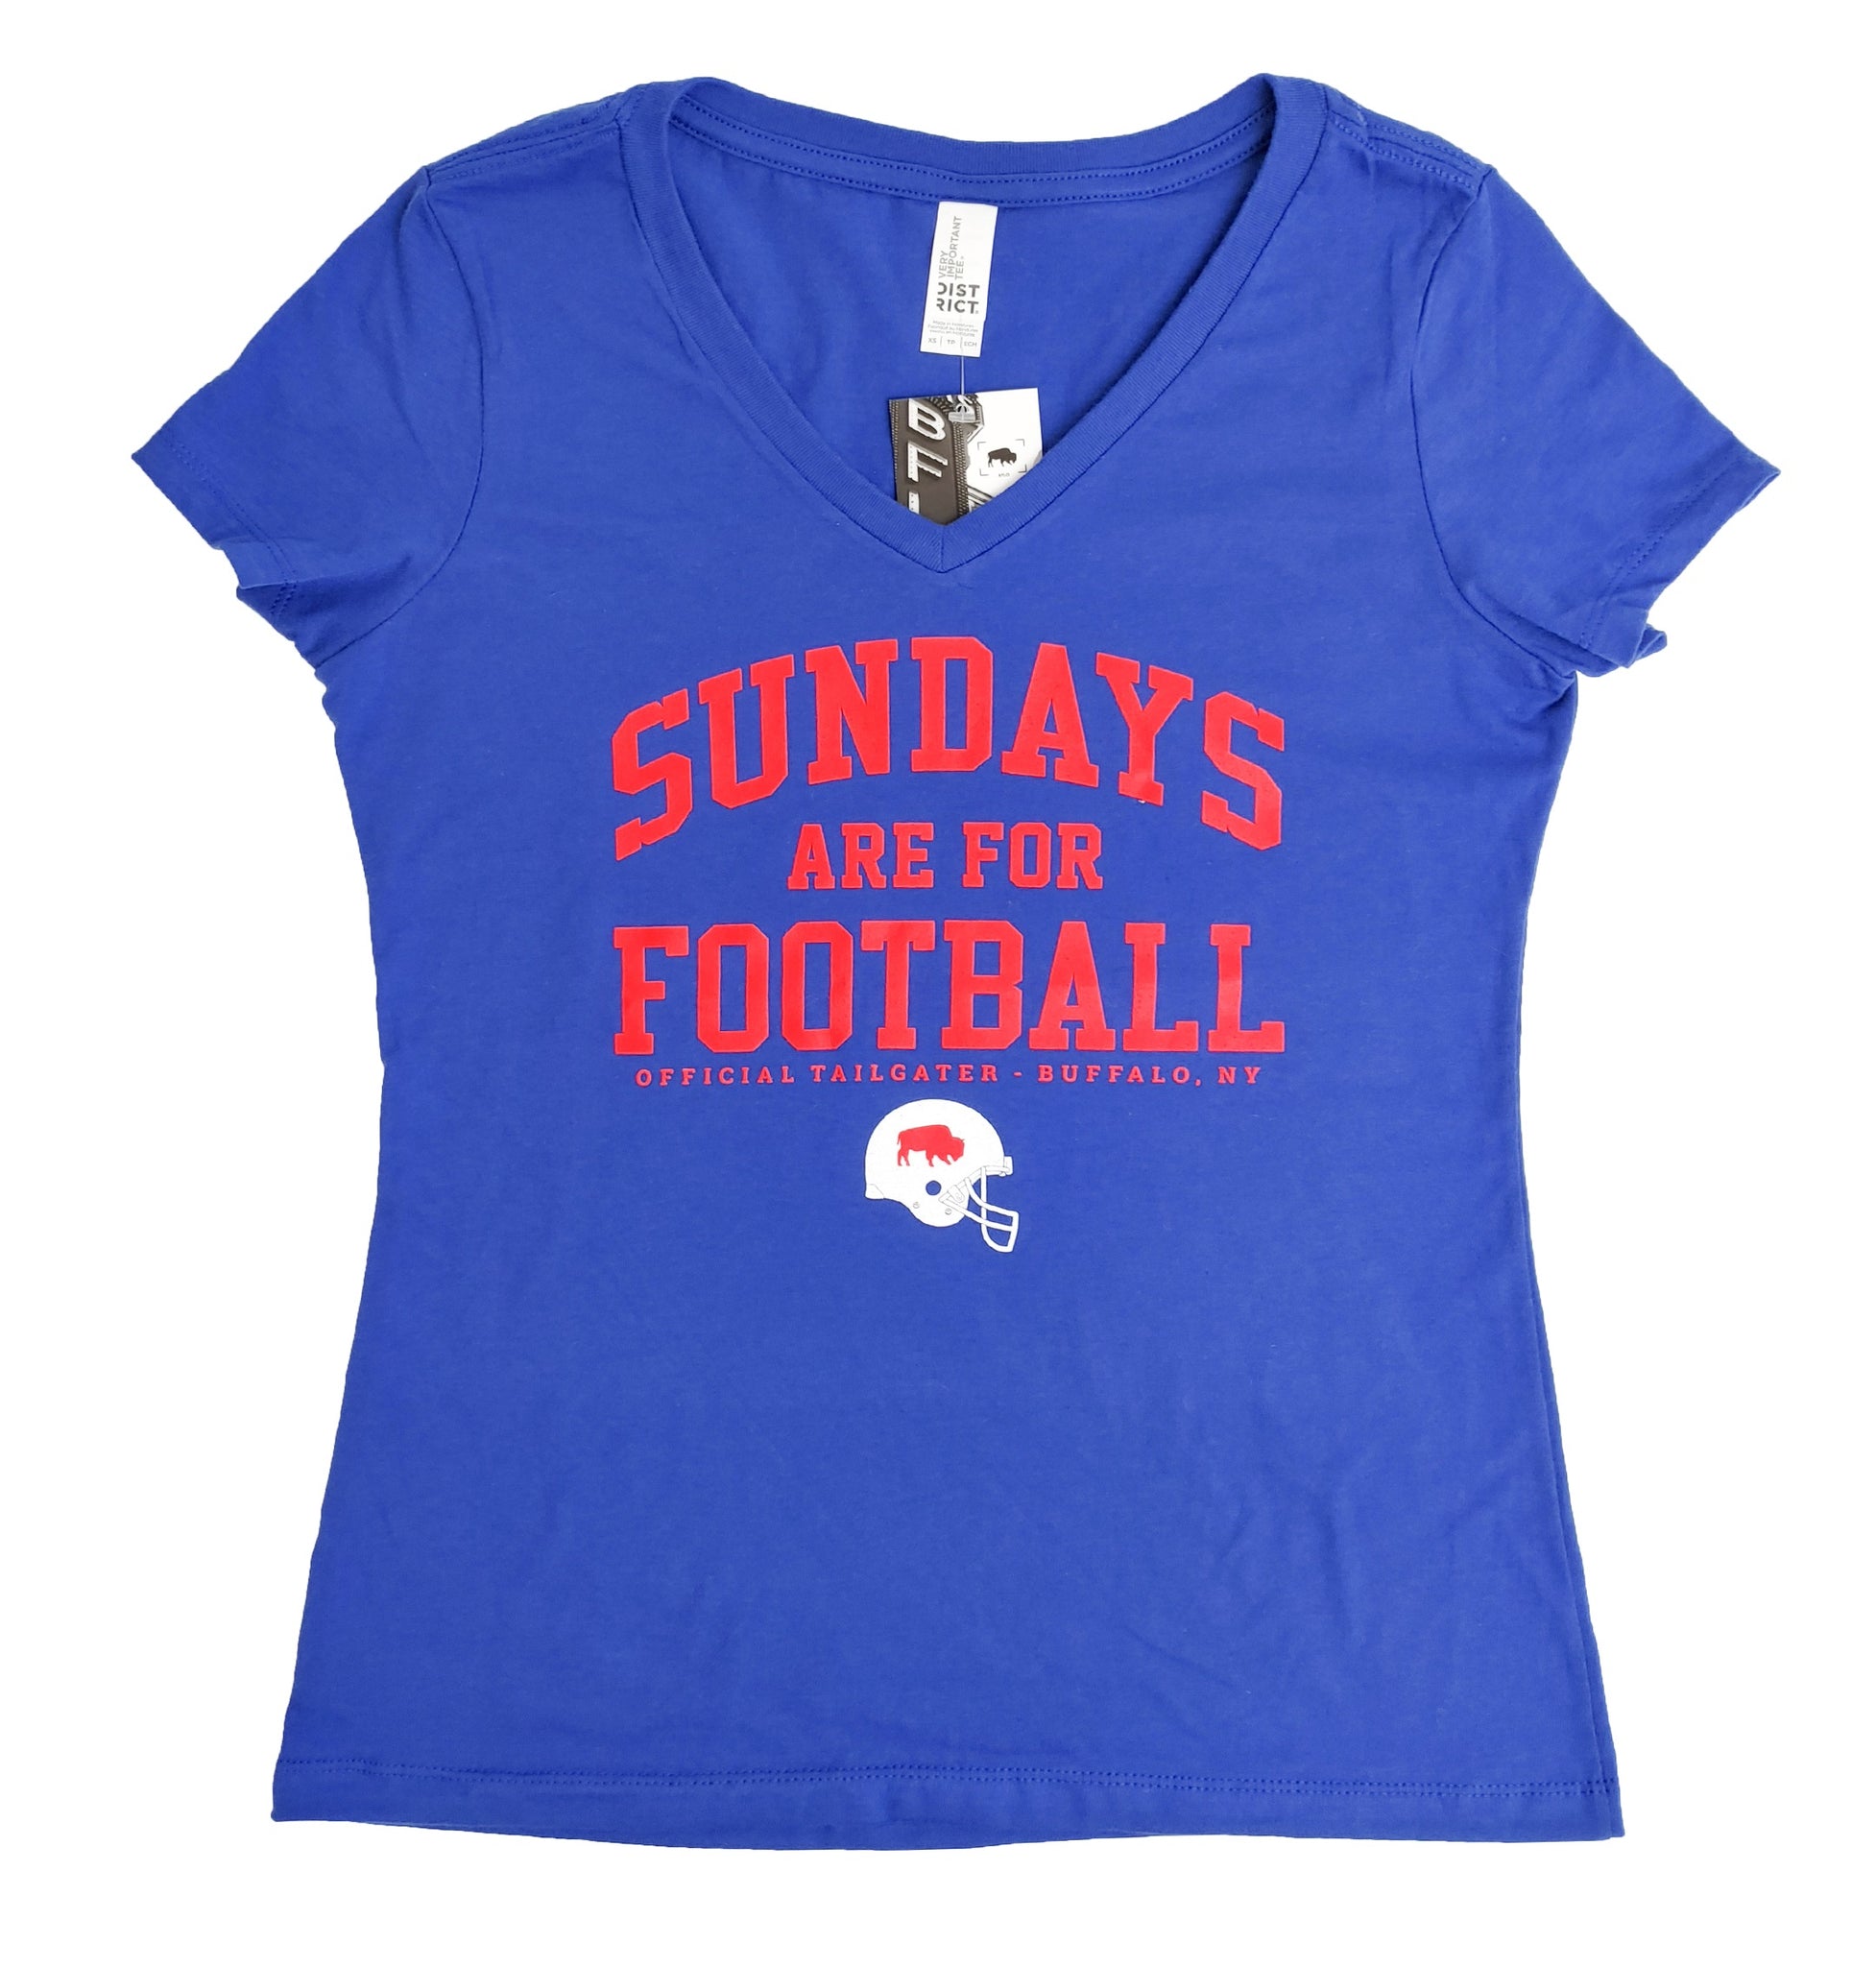 Ladies "Sundays Are For Football" Royal Blue V-Neck Tee